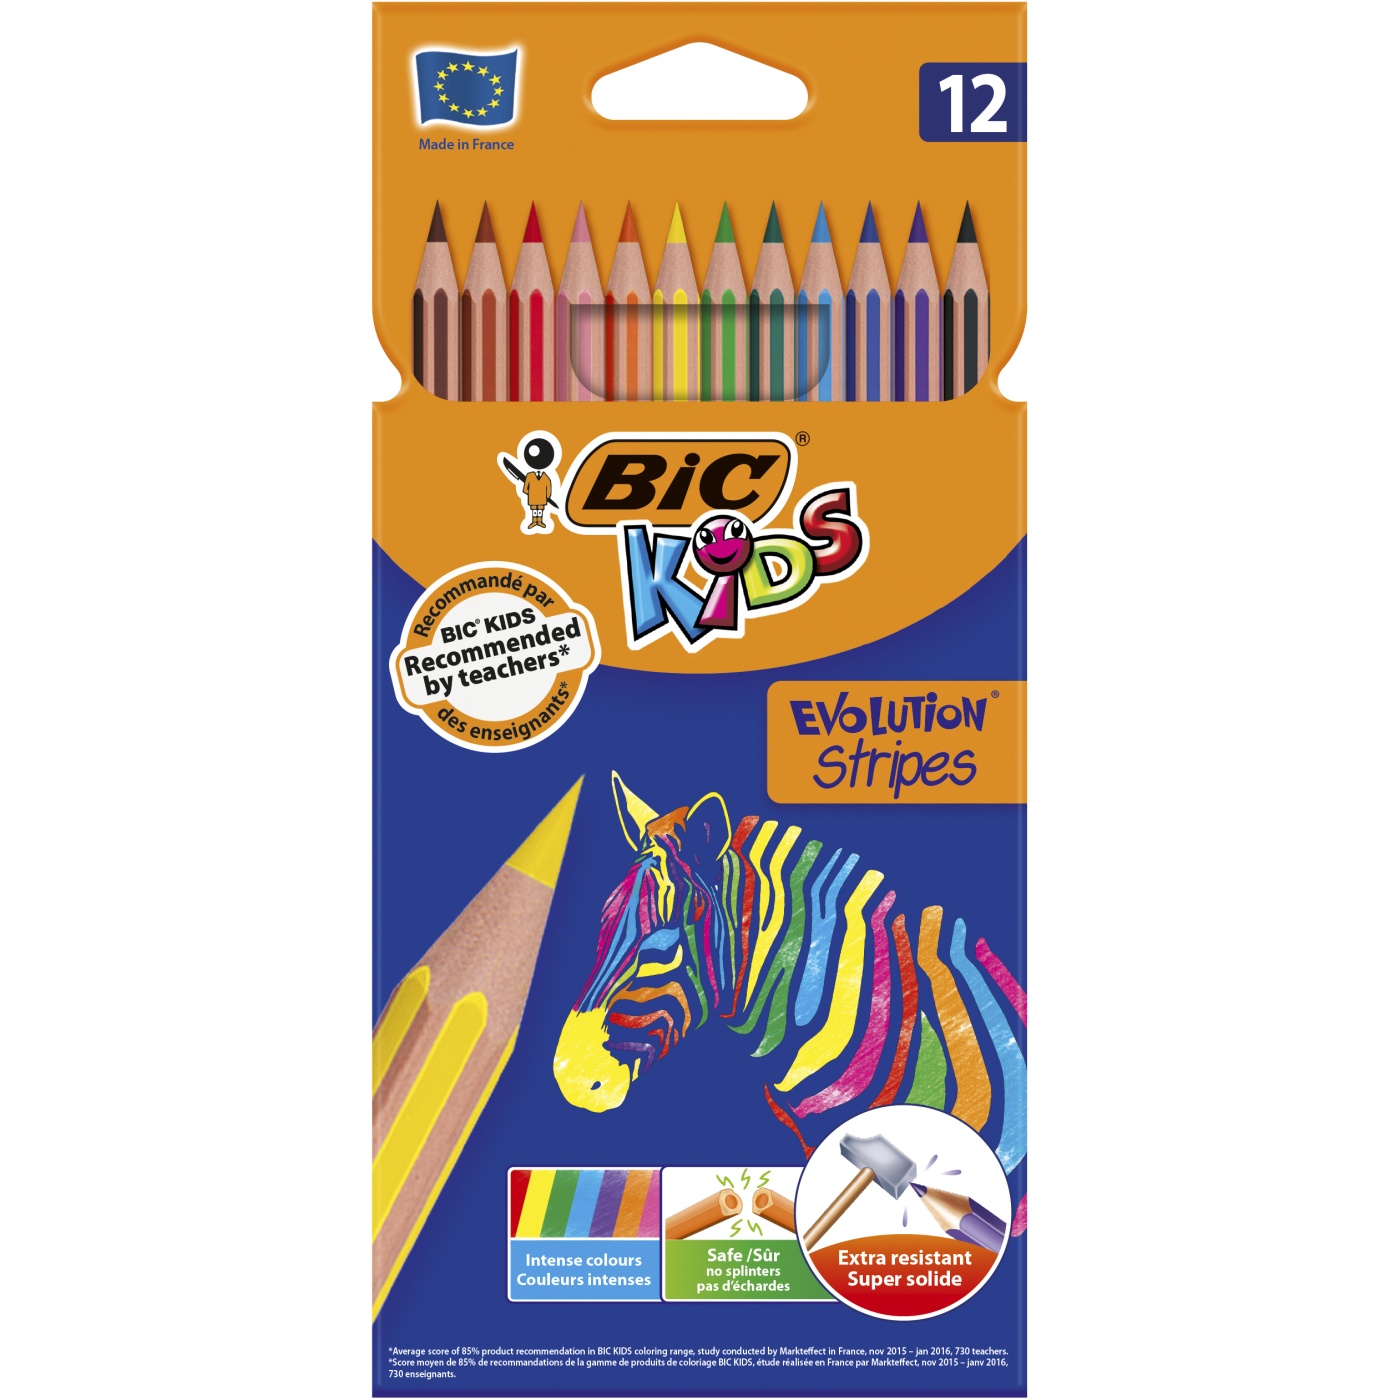 New Assorted Colors BIC Kids Coloring Pencils 3 Packs of 12 Colored Pencils 